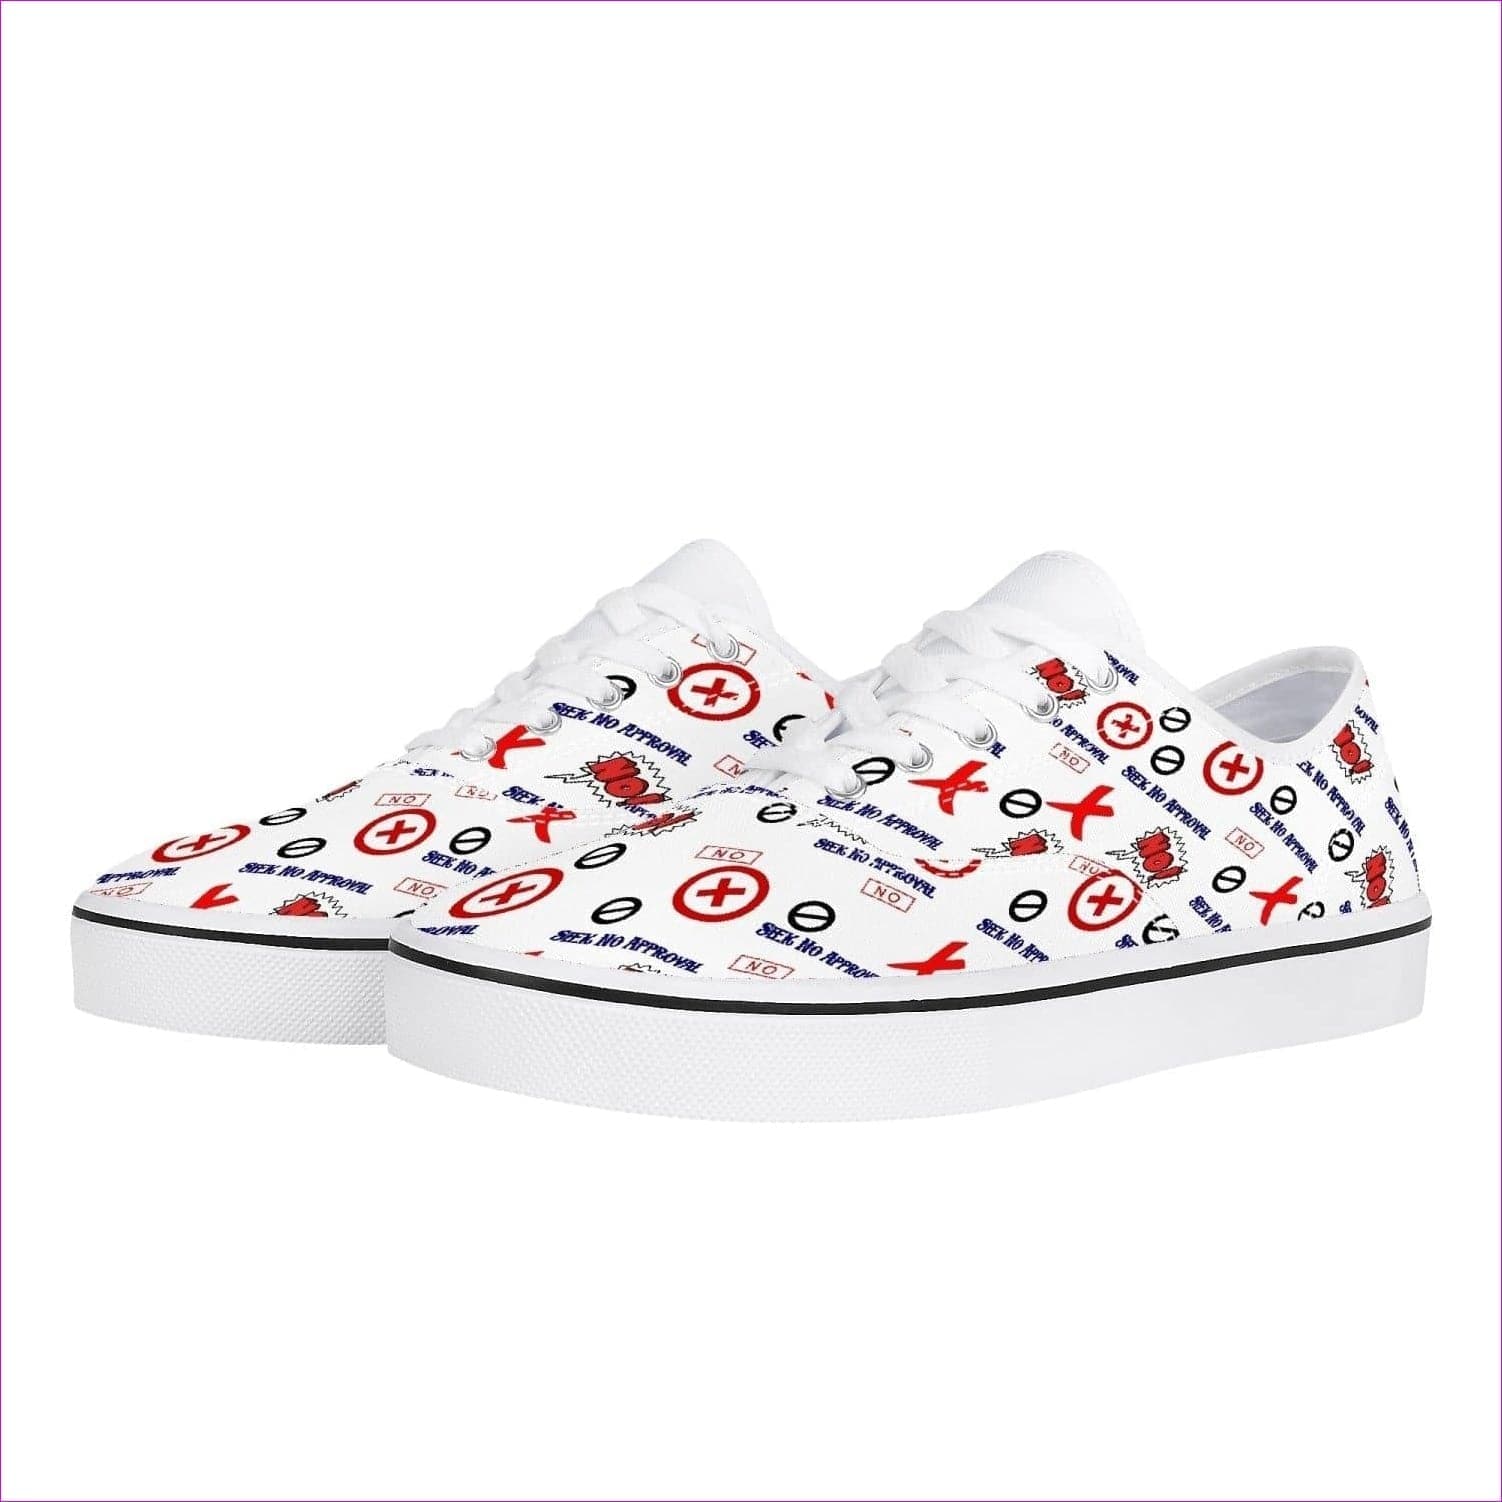 White - Seek No Approval Skate Shoes - 2 colors - womens shoe at TFC&H Co.